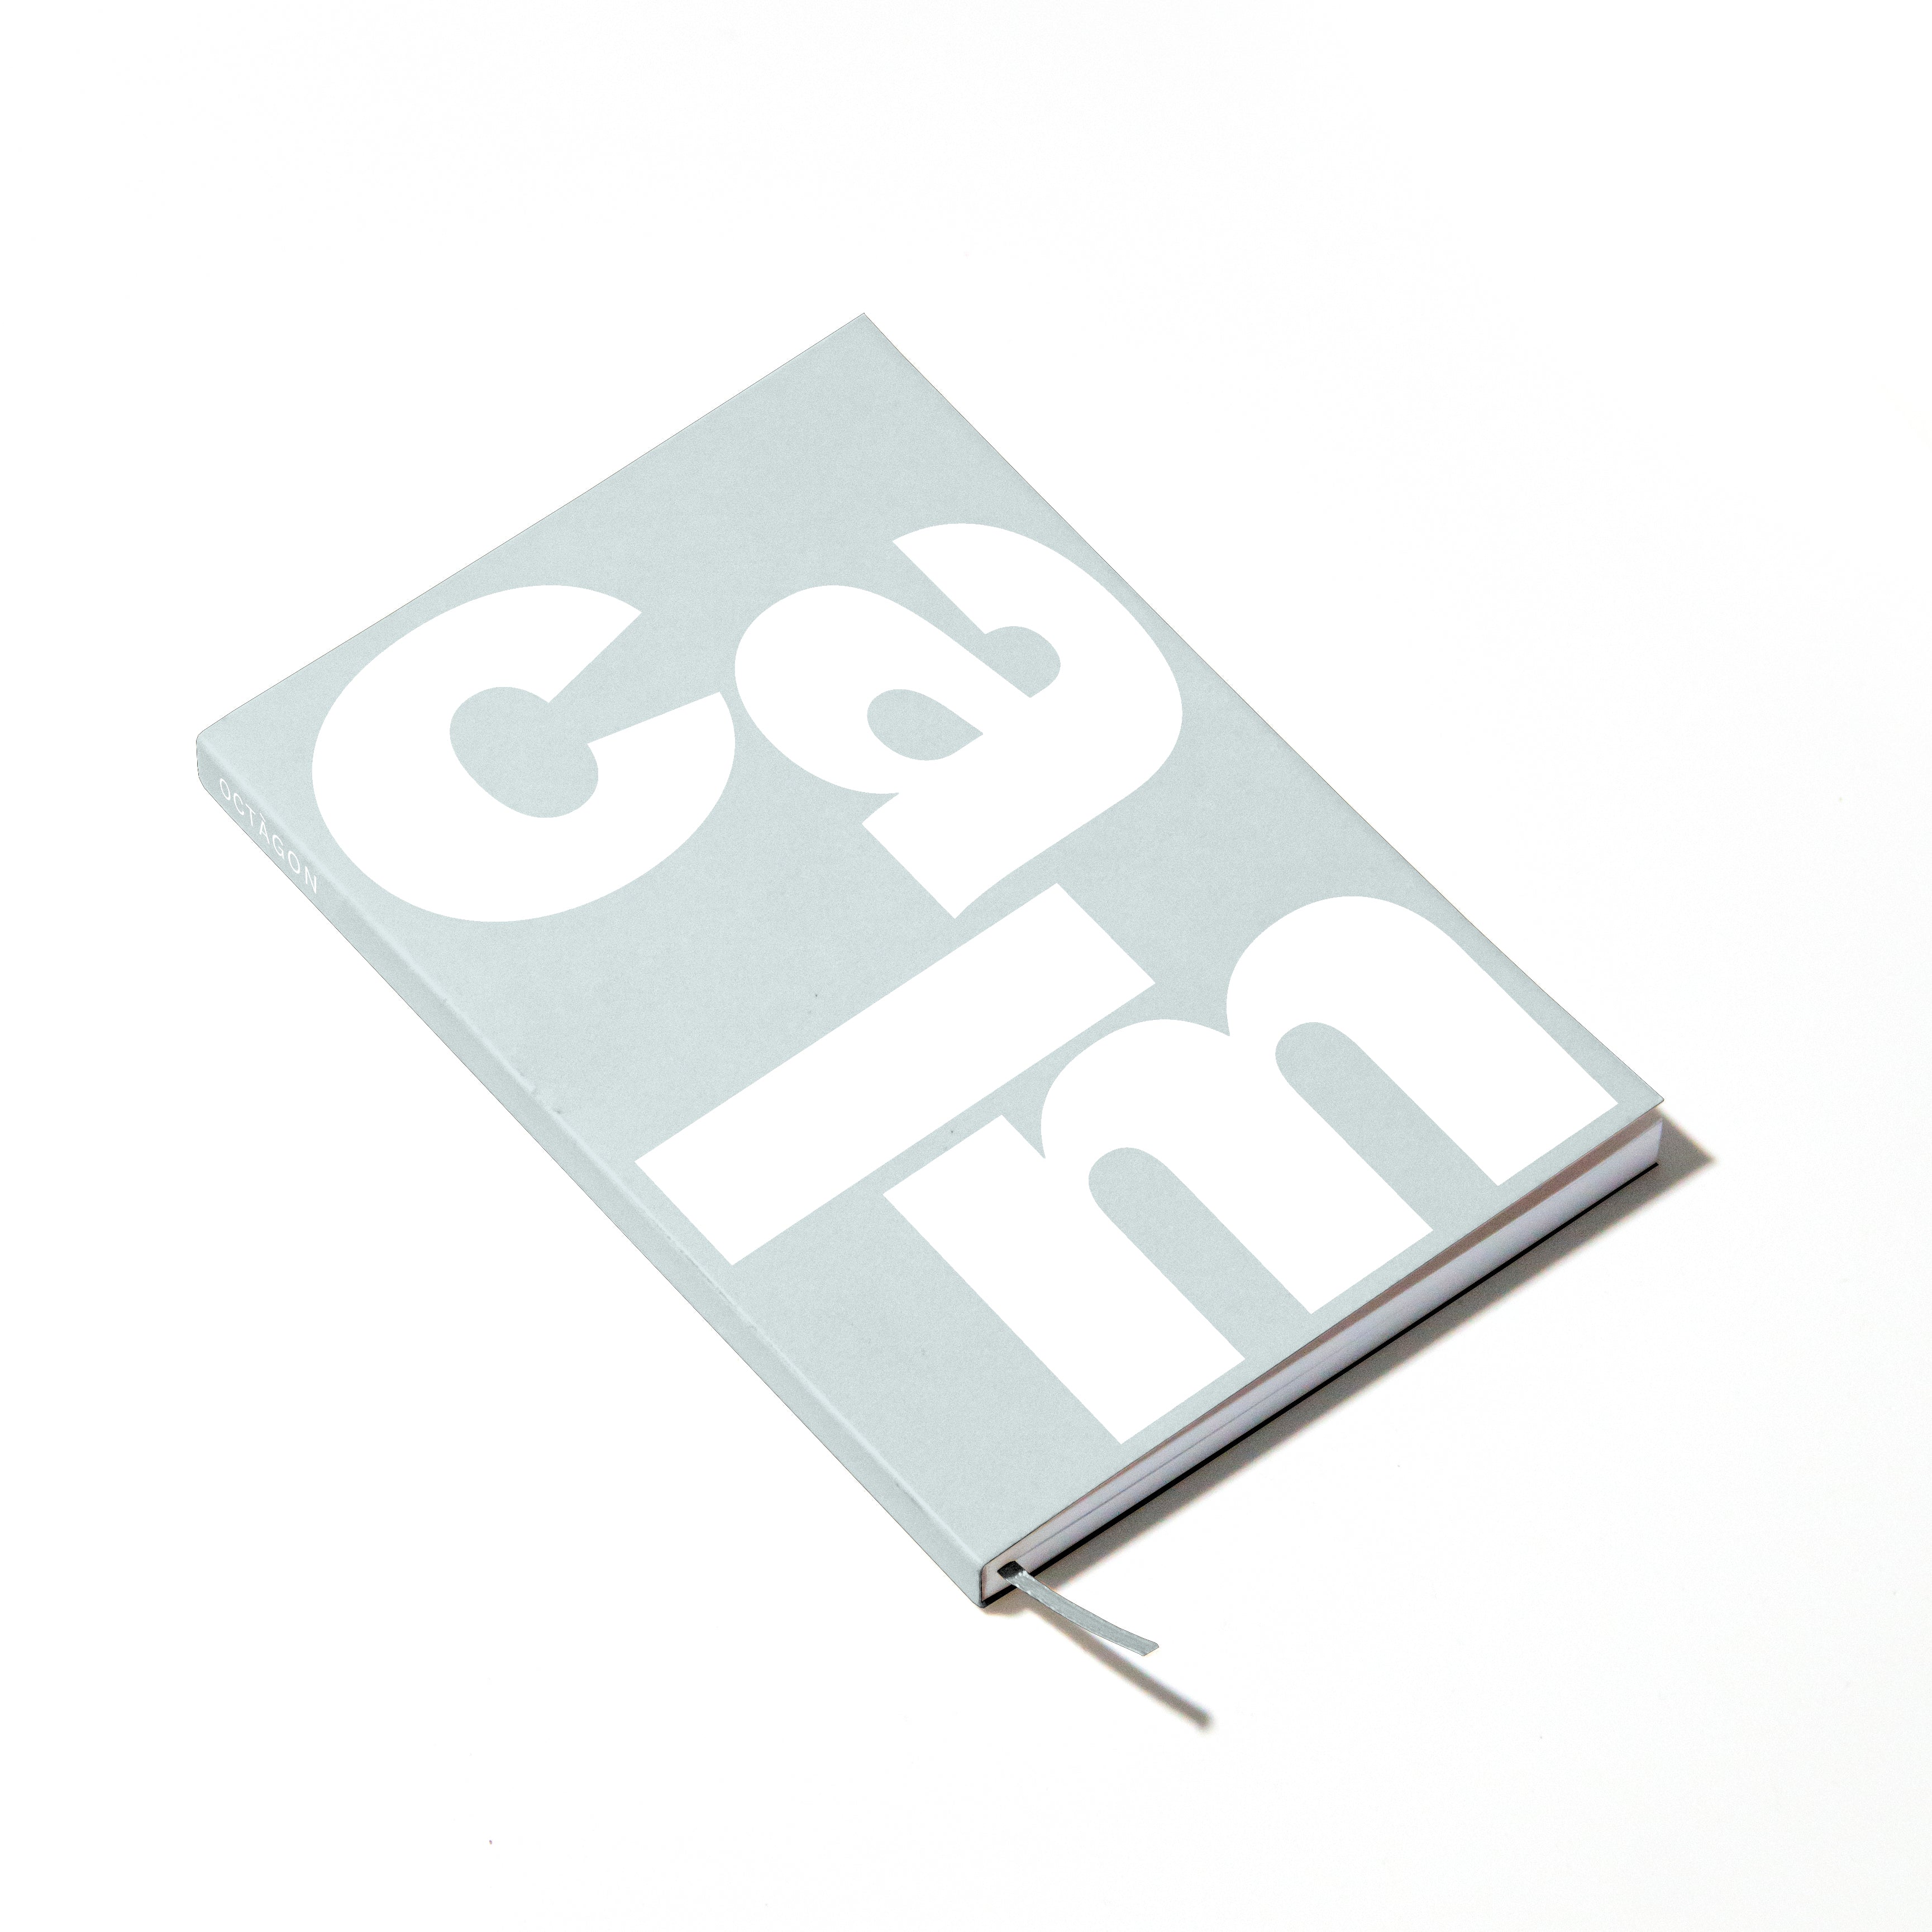 OCTÀGON DESIGN | Calm Notebook | Blue cover with white typography.